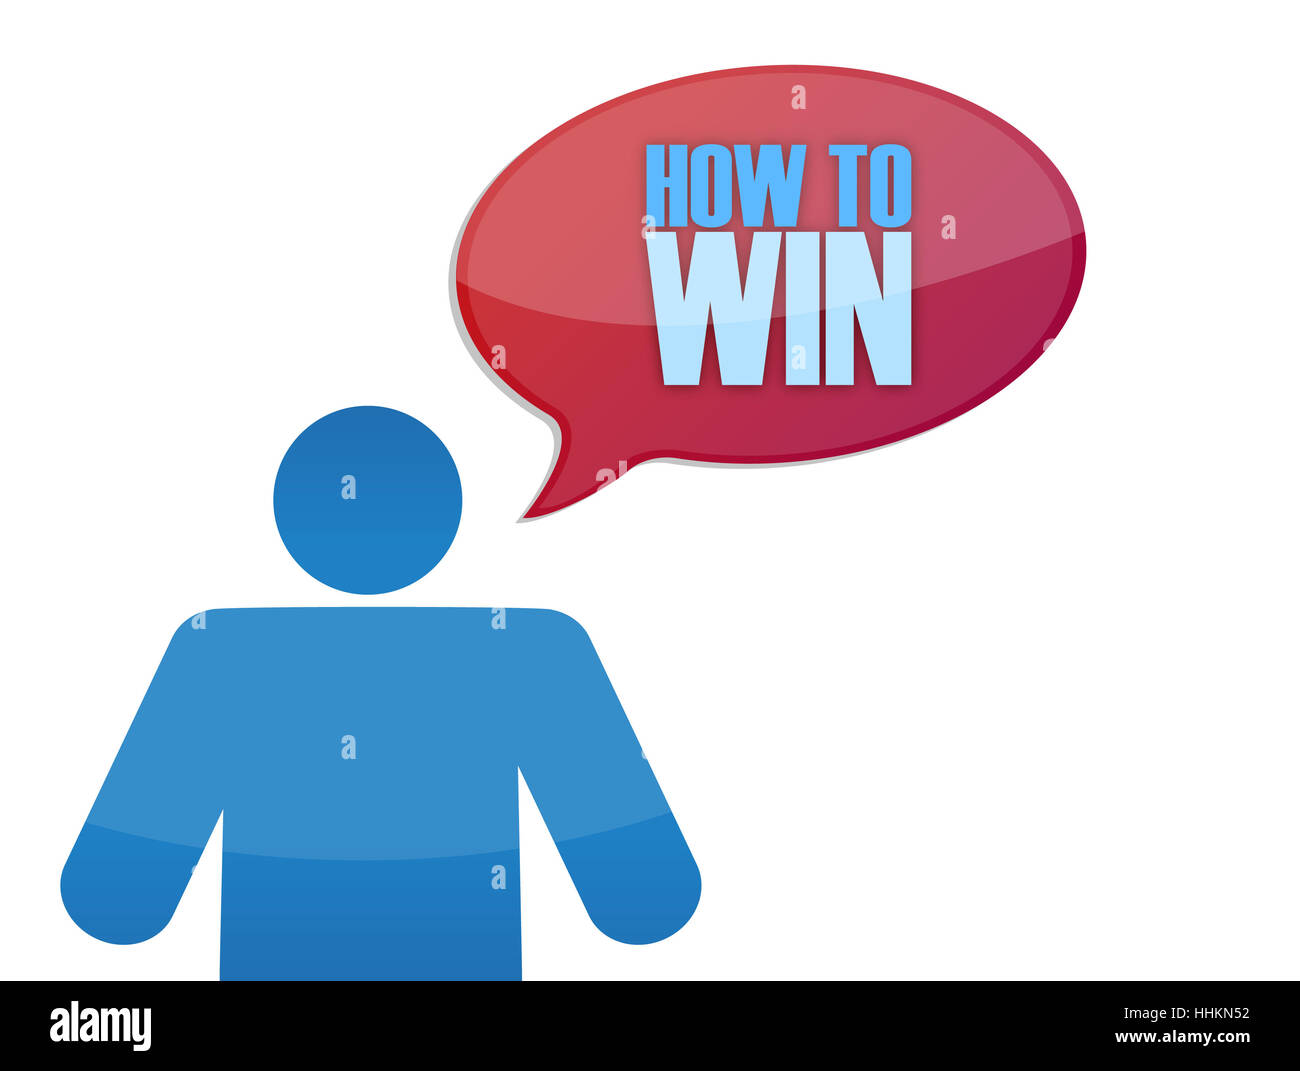 icon with a how to win message illustration design Stock Photo